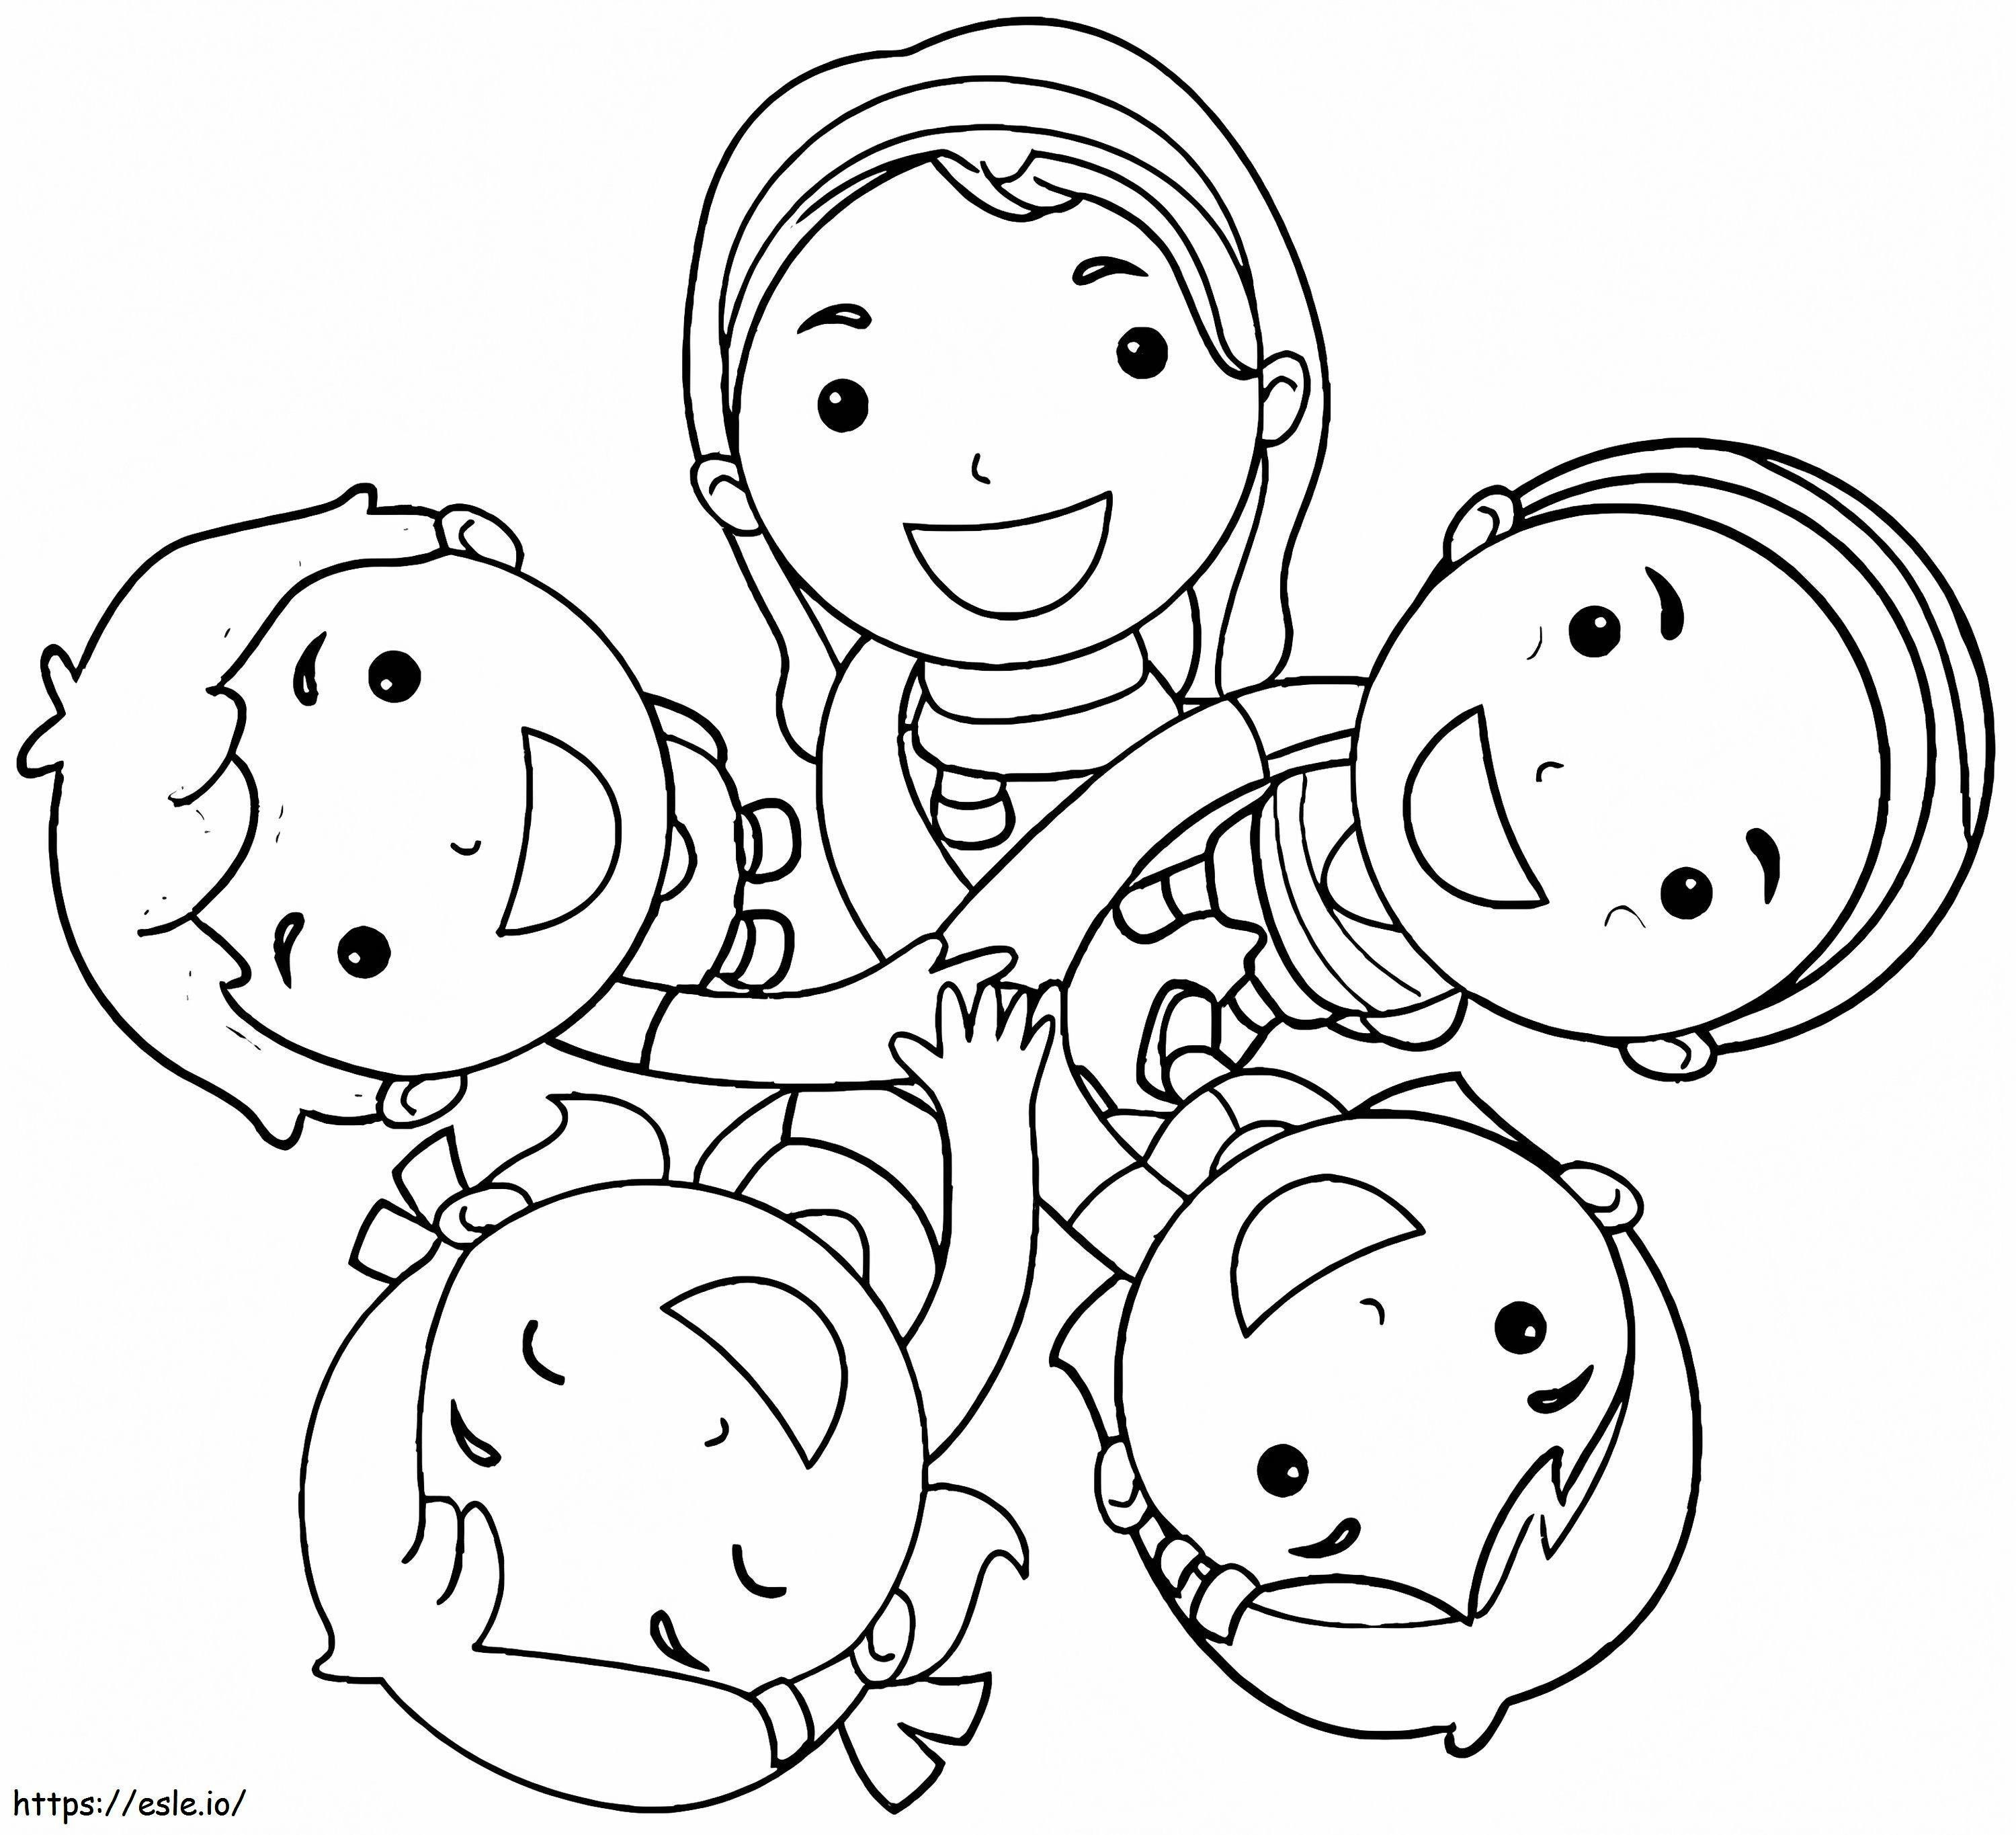 Friendship 1 coloring page